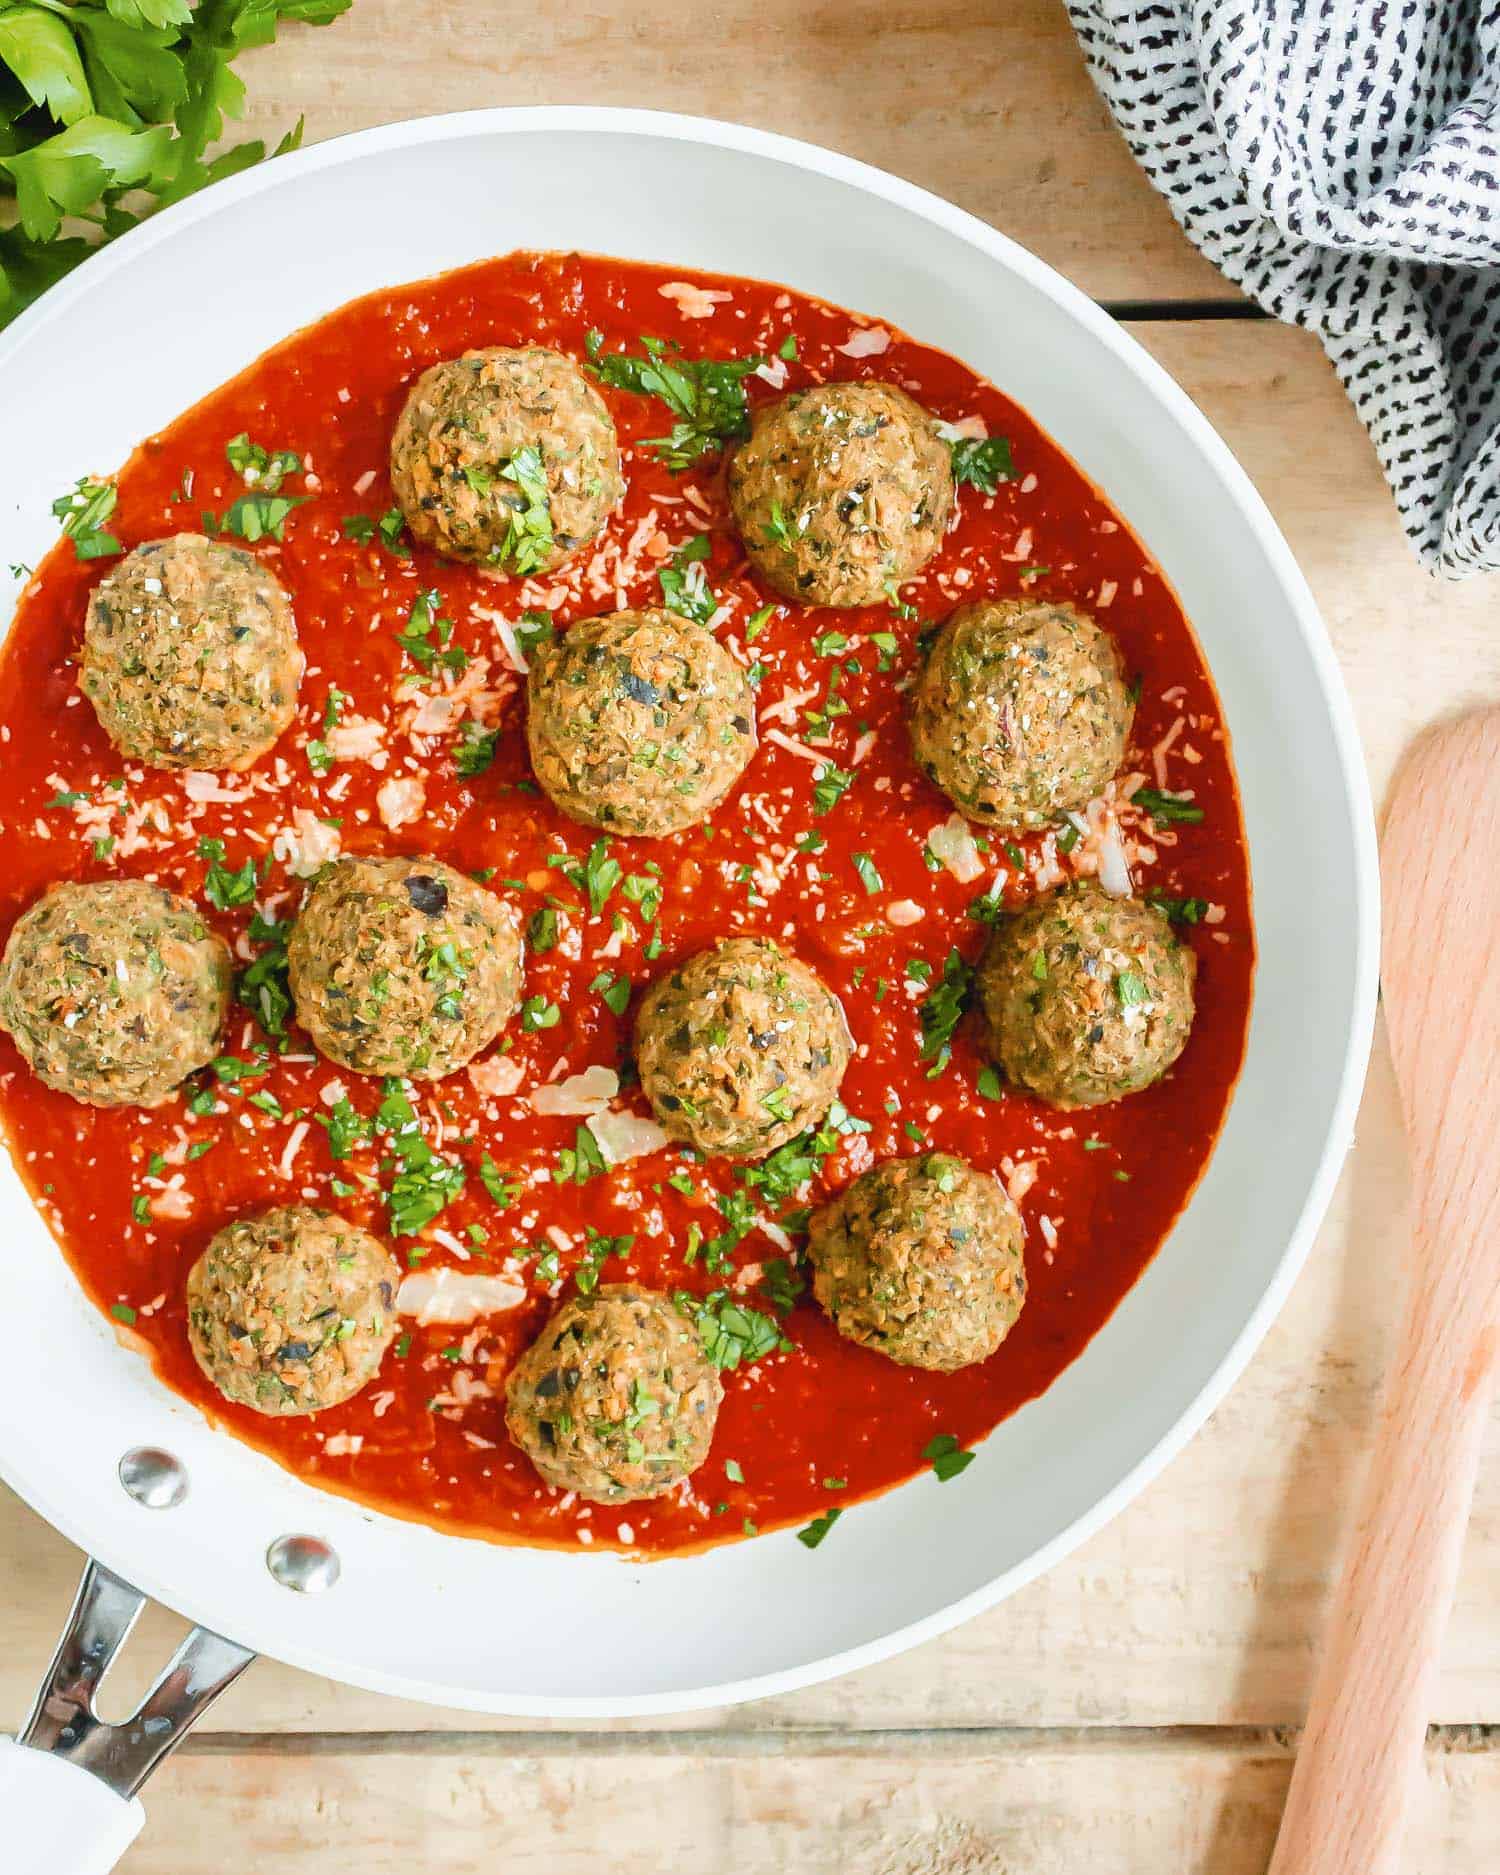 Meatballs and sauce in a frying pan.